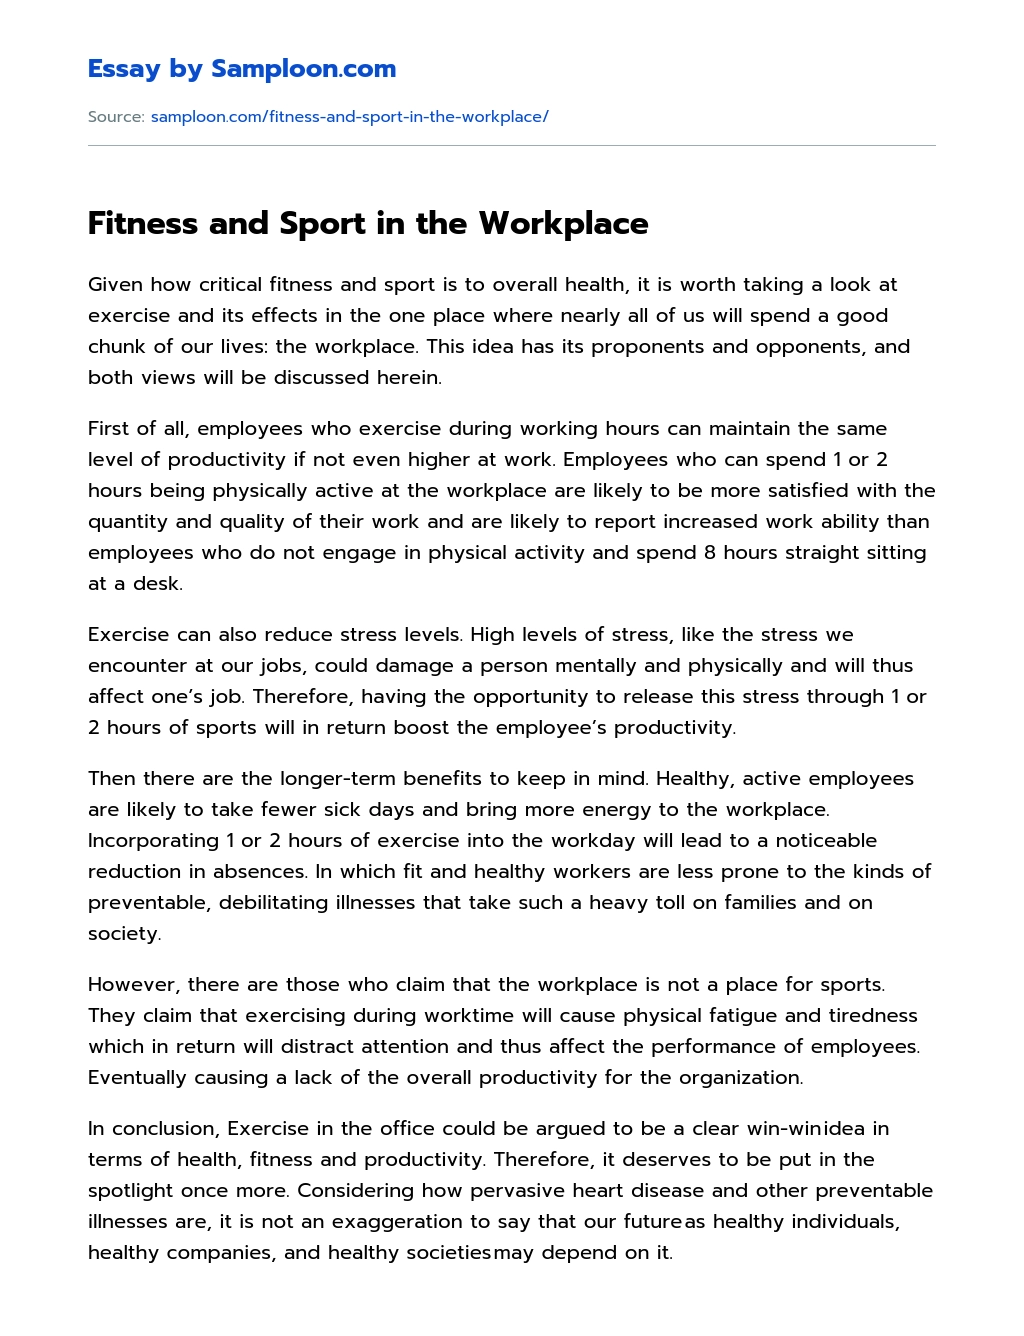 Fitness and Sport in the Workplace essay